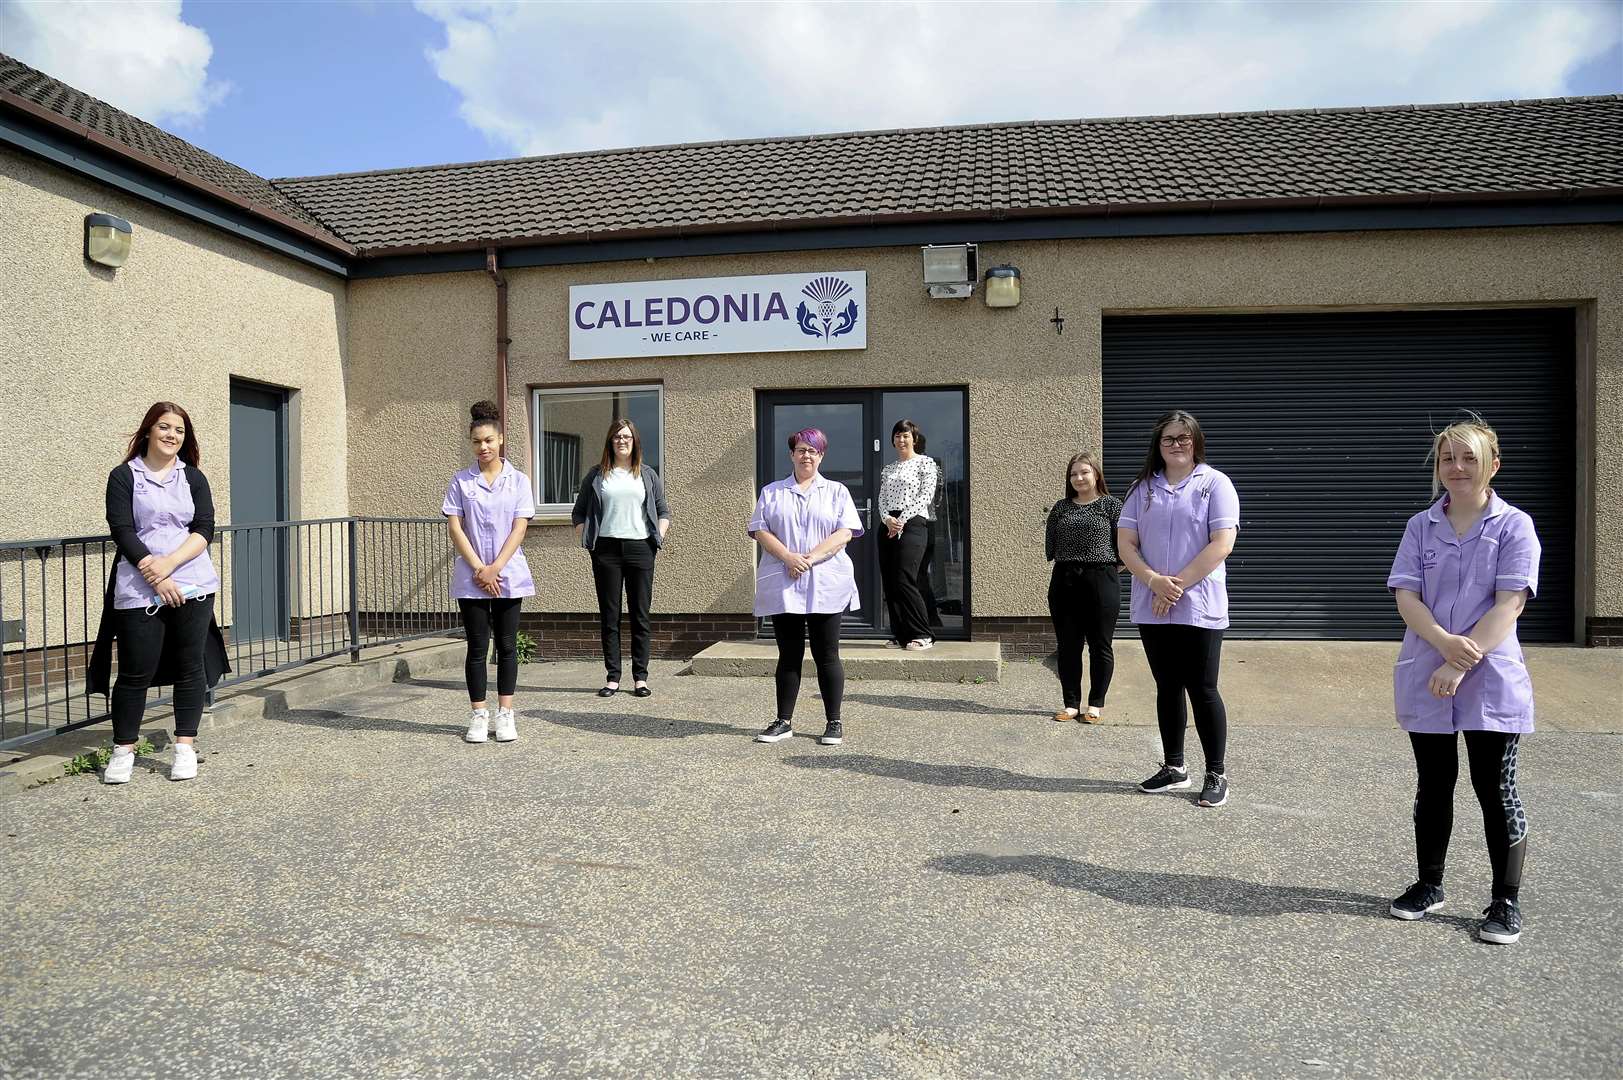 Some of the staff at Keith-based Caledonia Homecare, which has won the title of Best Home Healthcare Provider in Scotland in the Prestige Business Awards. Picture: Becky Saunderson.